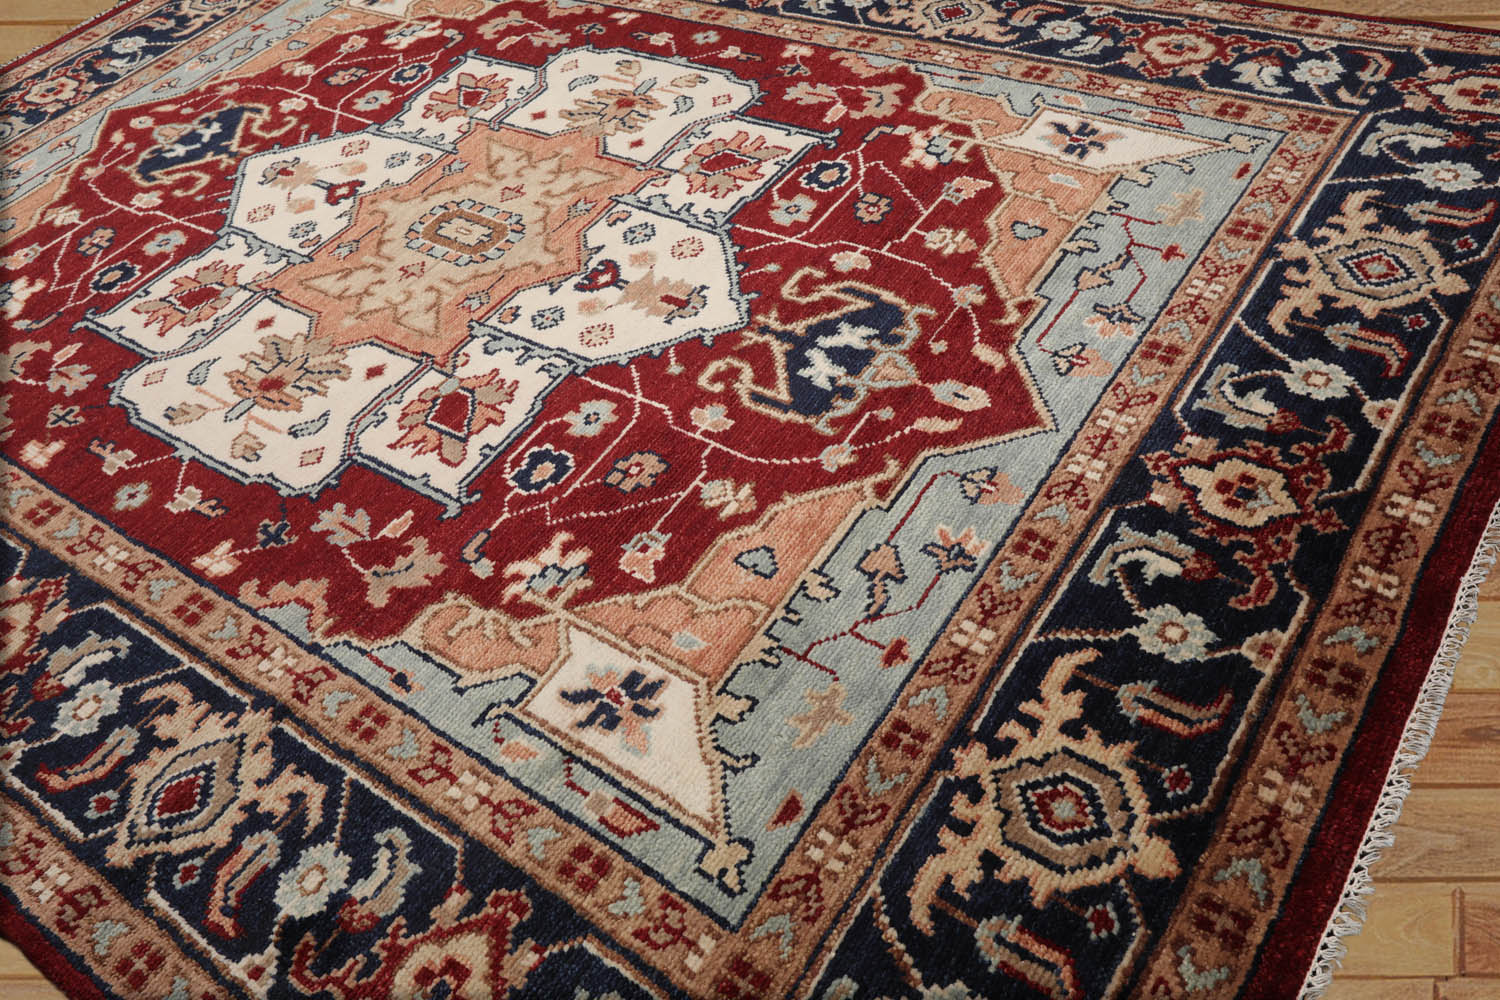 Gahnshyam 9x12 Hand Knotted 100% Wool Heriz Traditional Oriental Area Rug Rust, Navy Color